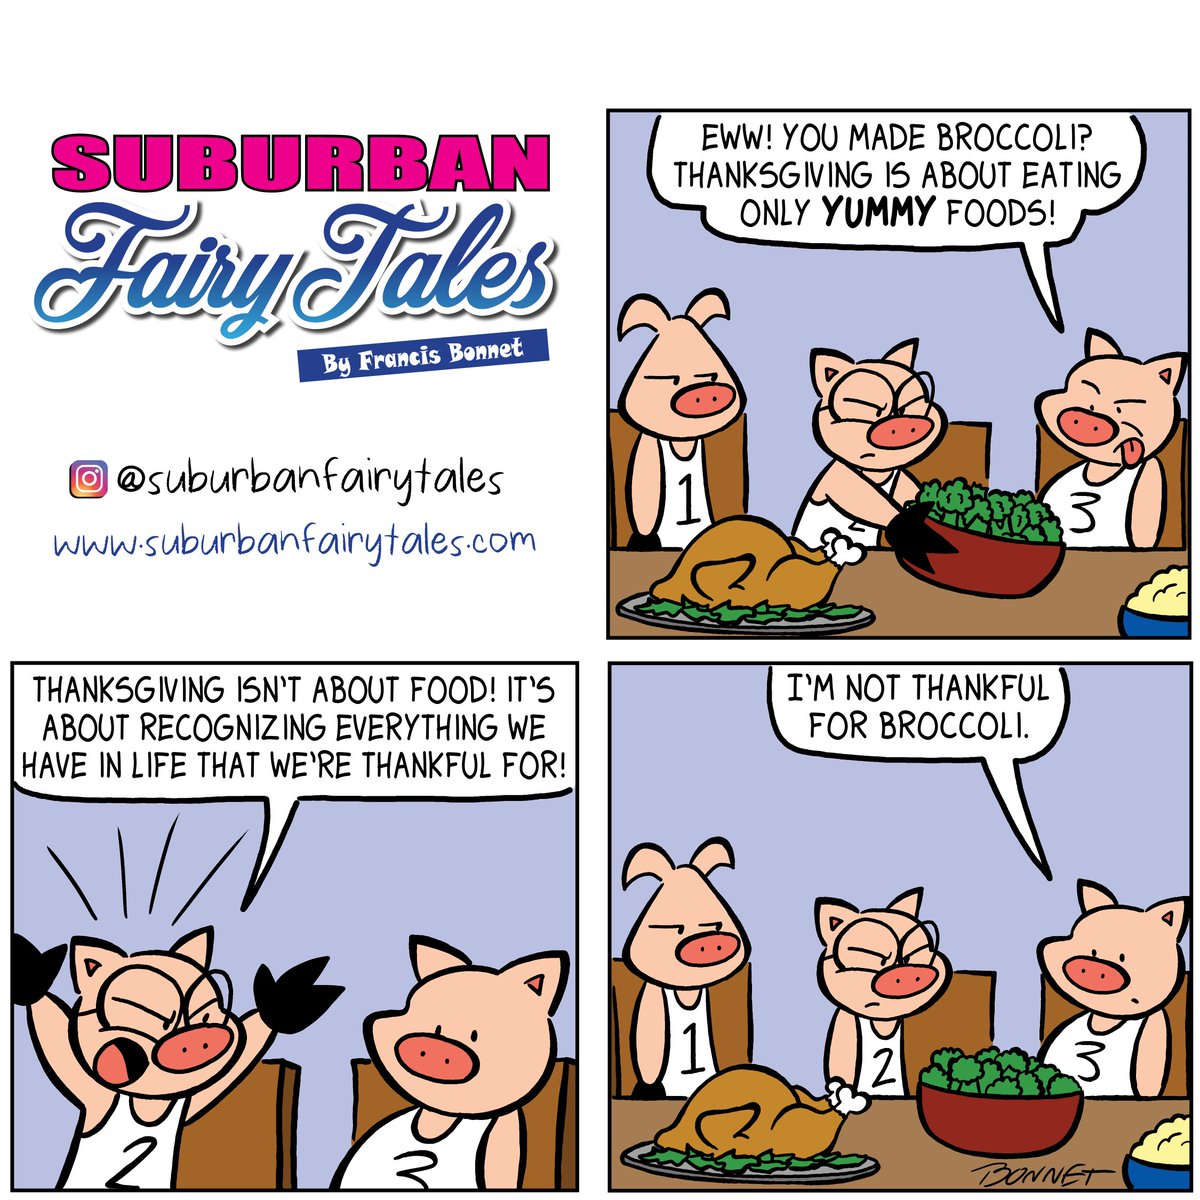 For those of you celebrating Thanksgiving, hope you have a good one!
#cartoonist #comicseries #dailycomicstrip #fairytales #3littlepigs #webcomic #originalcomic #silly #instacomics #makingcomics #thanksgiving #thanksgivingdinner #broccoli #thankful #eww